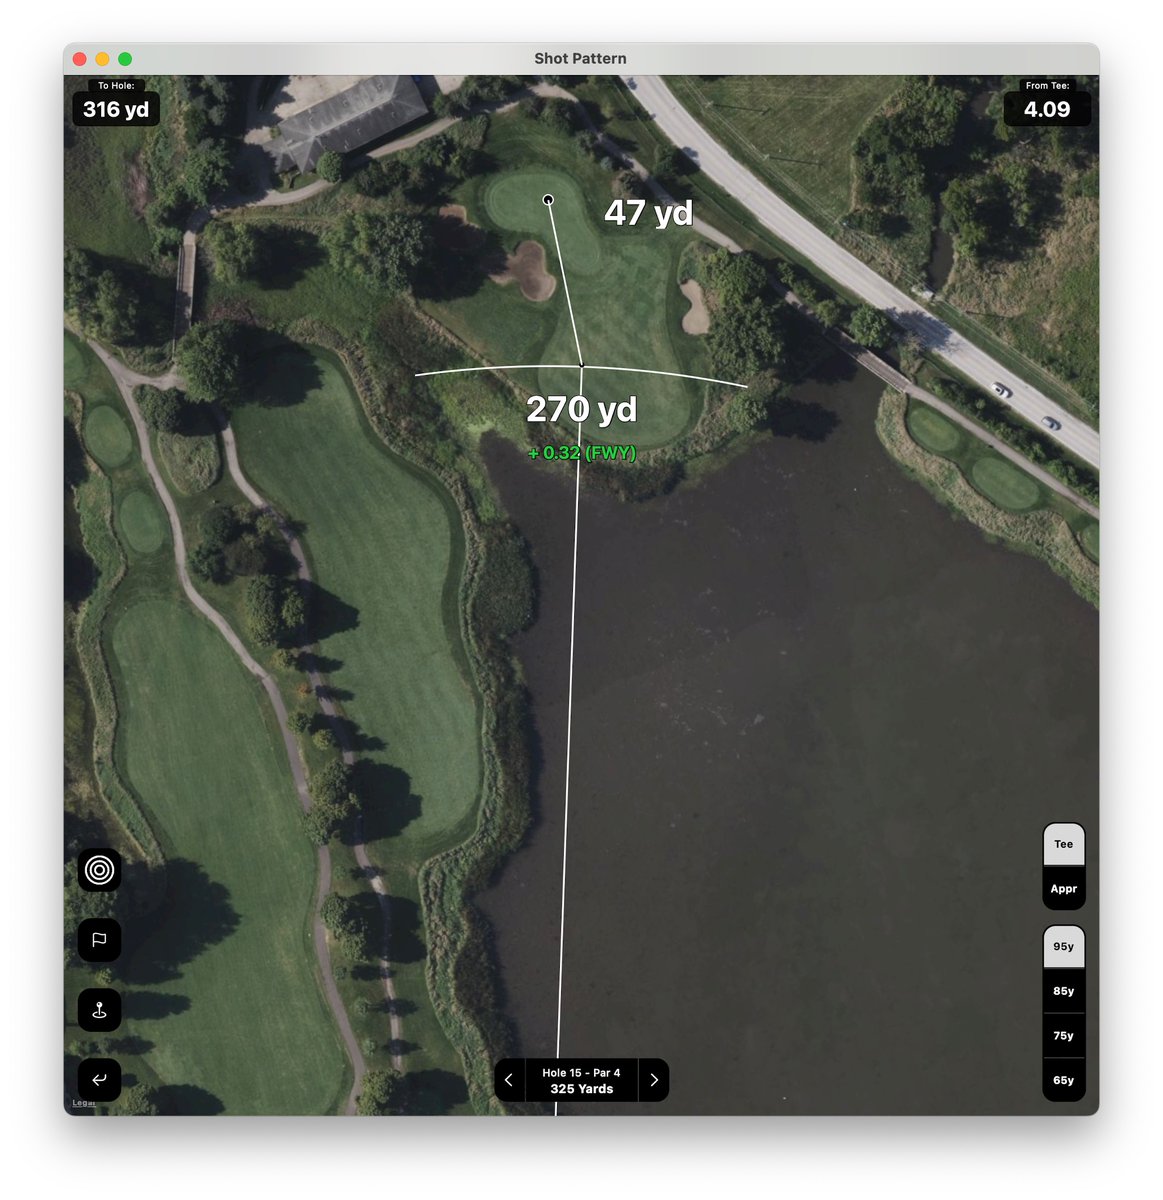 Oh my! Tantalizing tee shot for the big hitters out there! 18-hole stroke play tournament. Pays one place. (But is part of a 9-round, season-long Fed Ex Cup style competition. Shoutout @GolfTourChicago) 95-yard wide Shot Pattern at 270 yards pictured. Are you going for it?